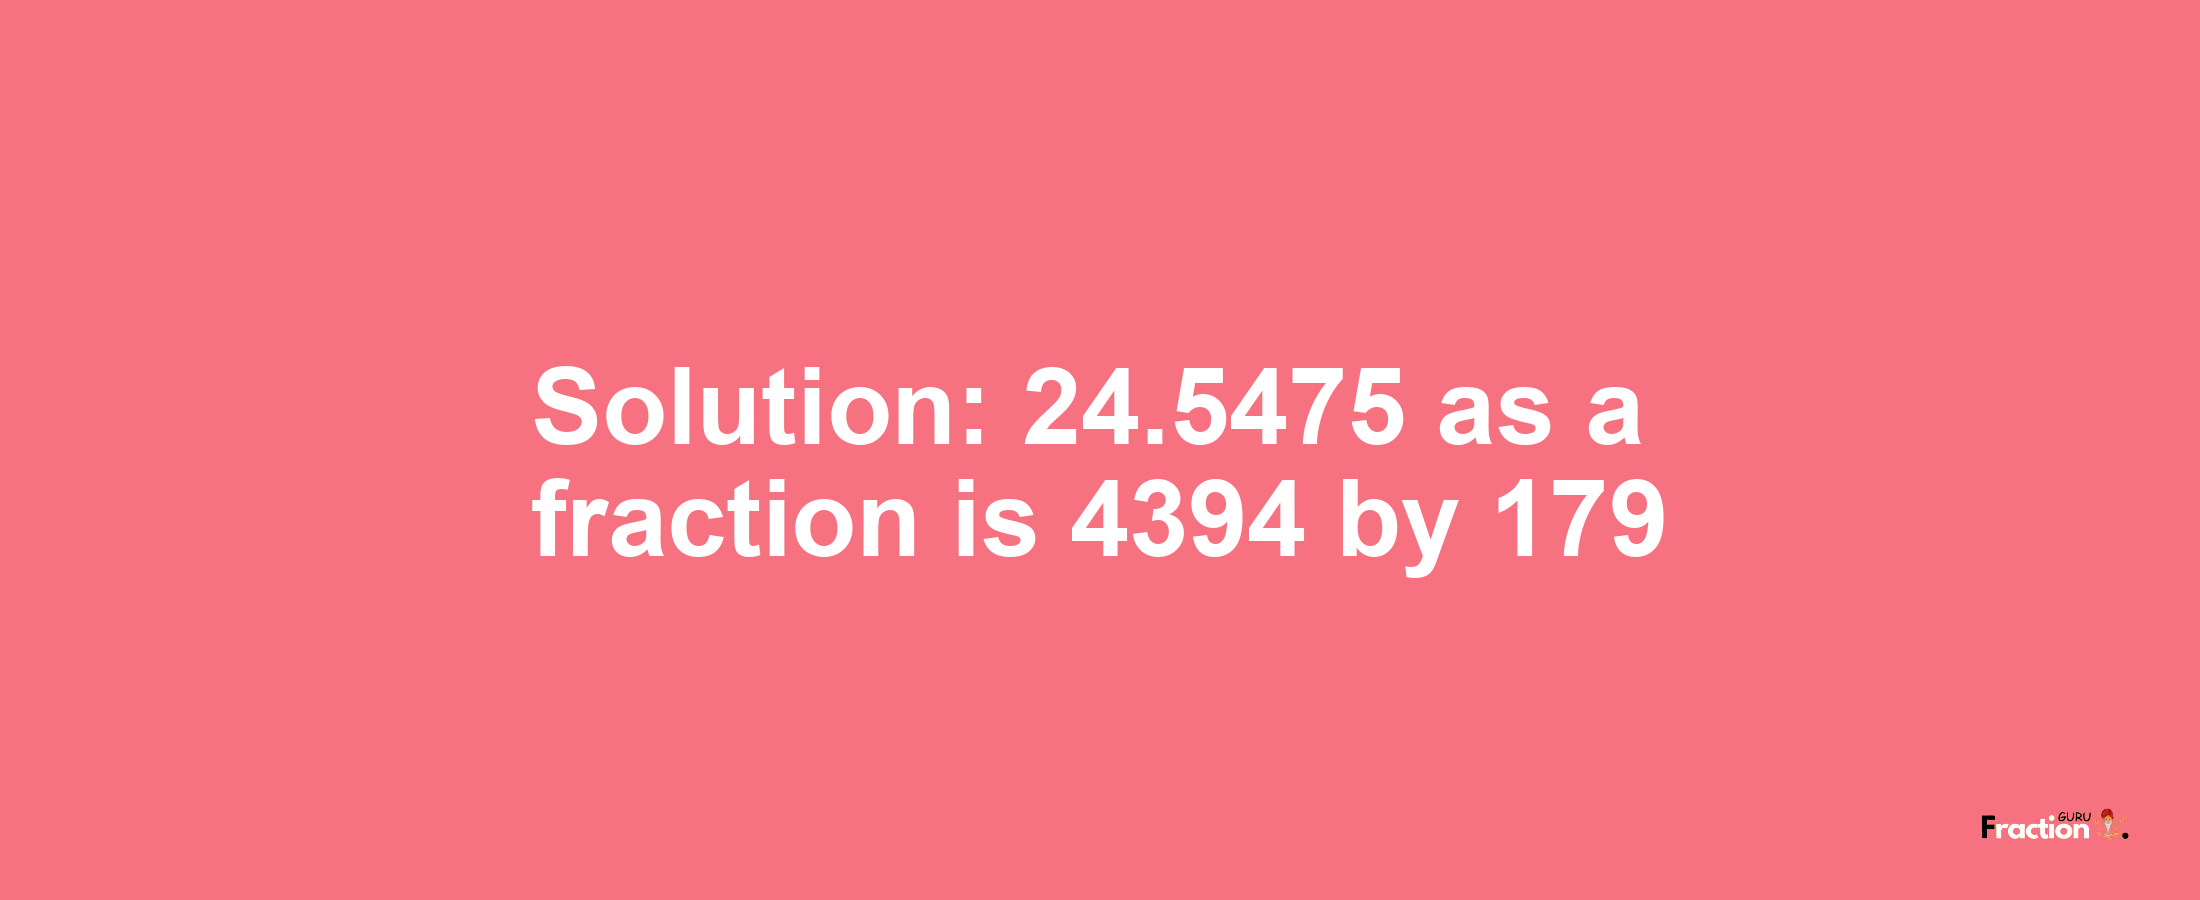 Solution:24.5475 as a fraction is 4394/179